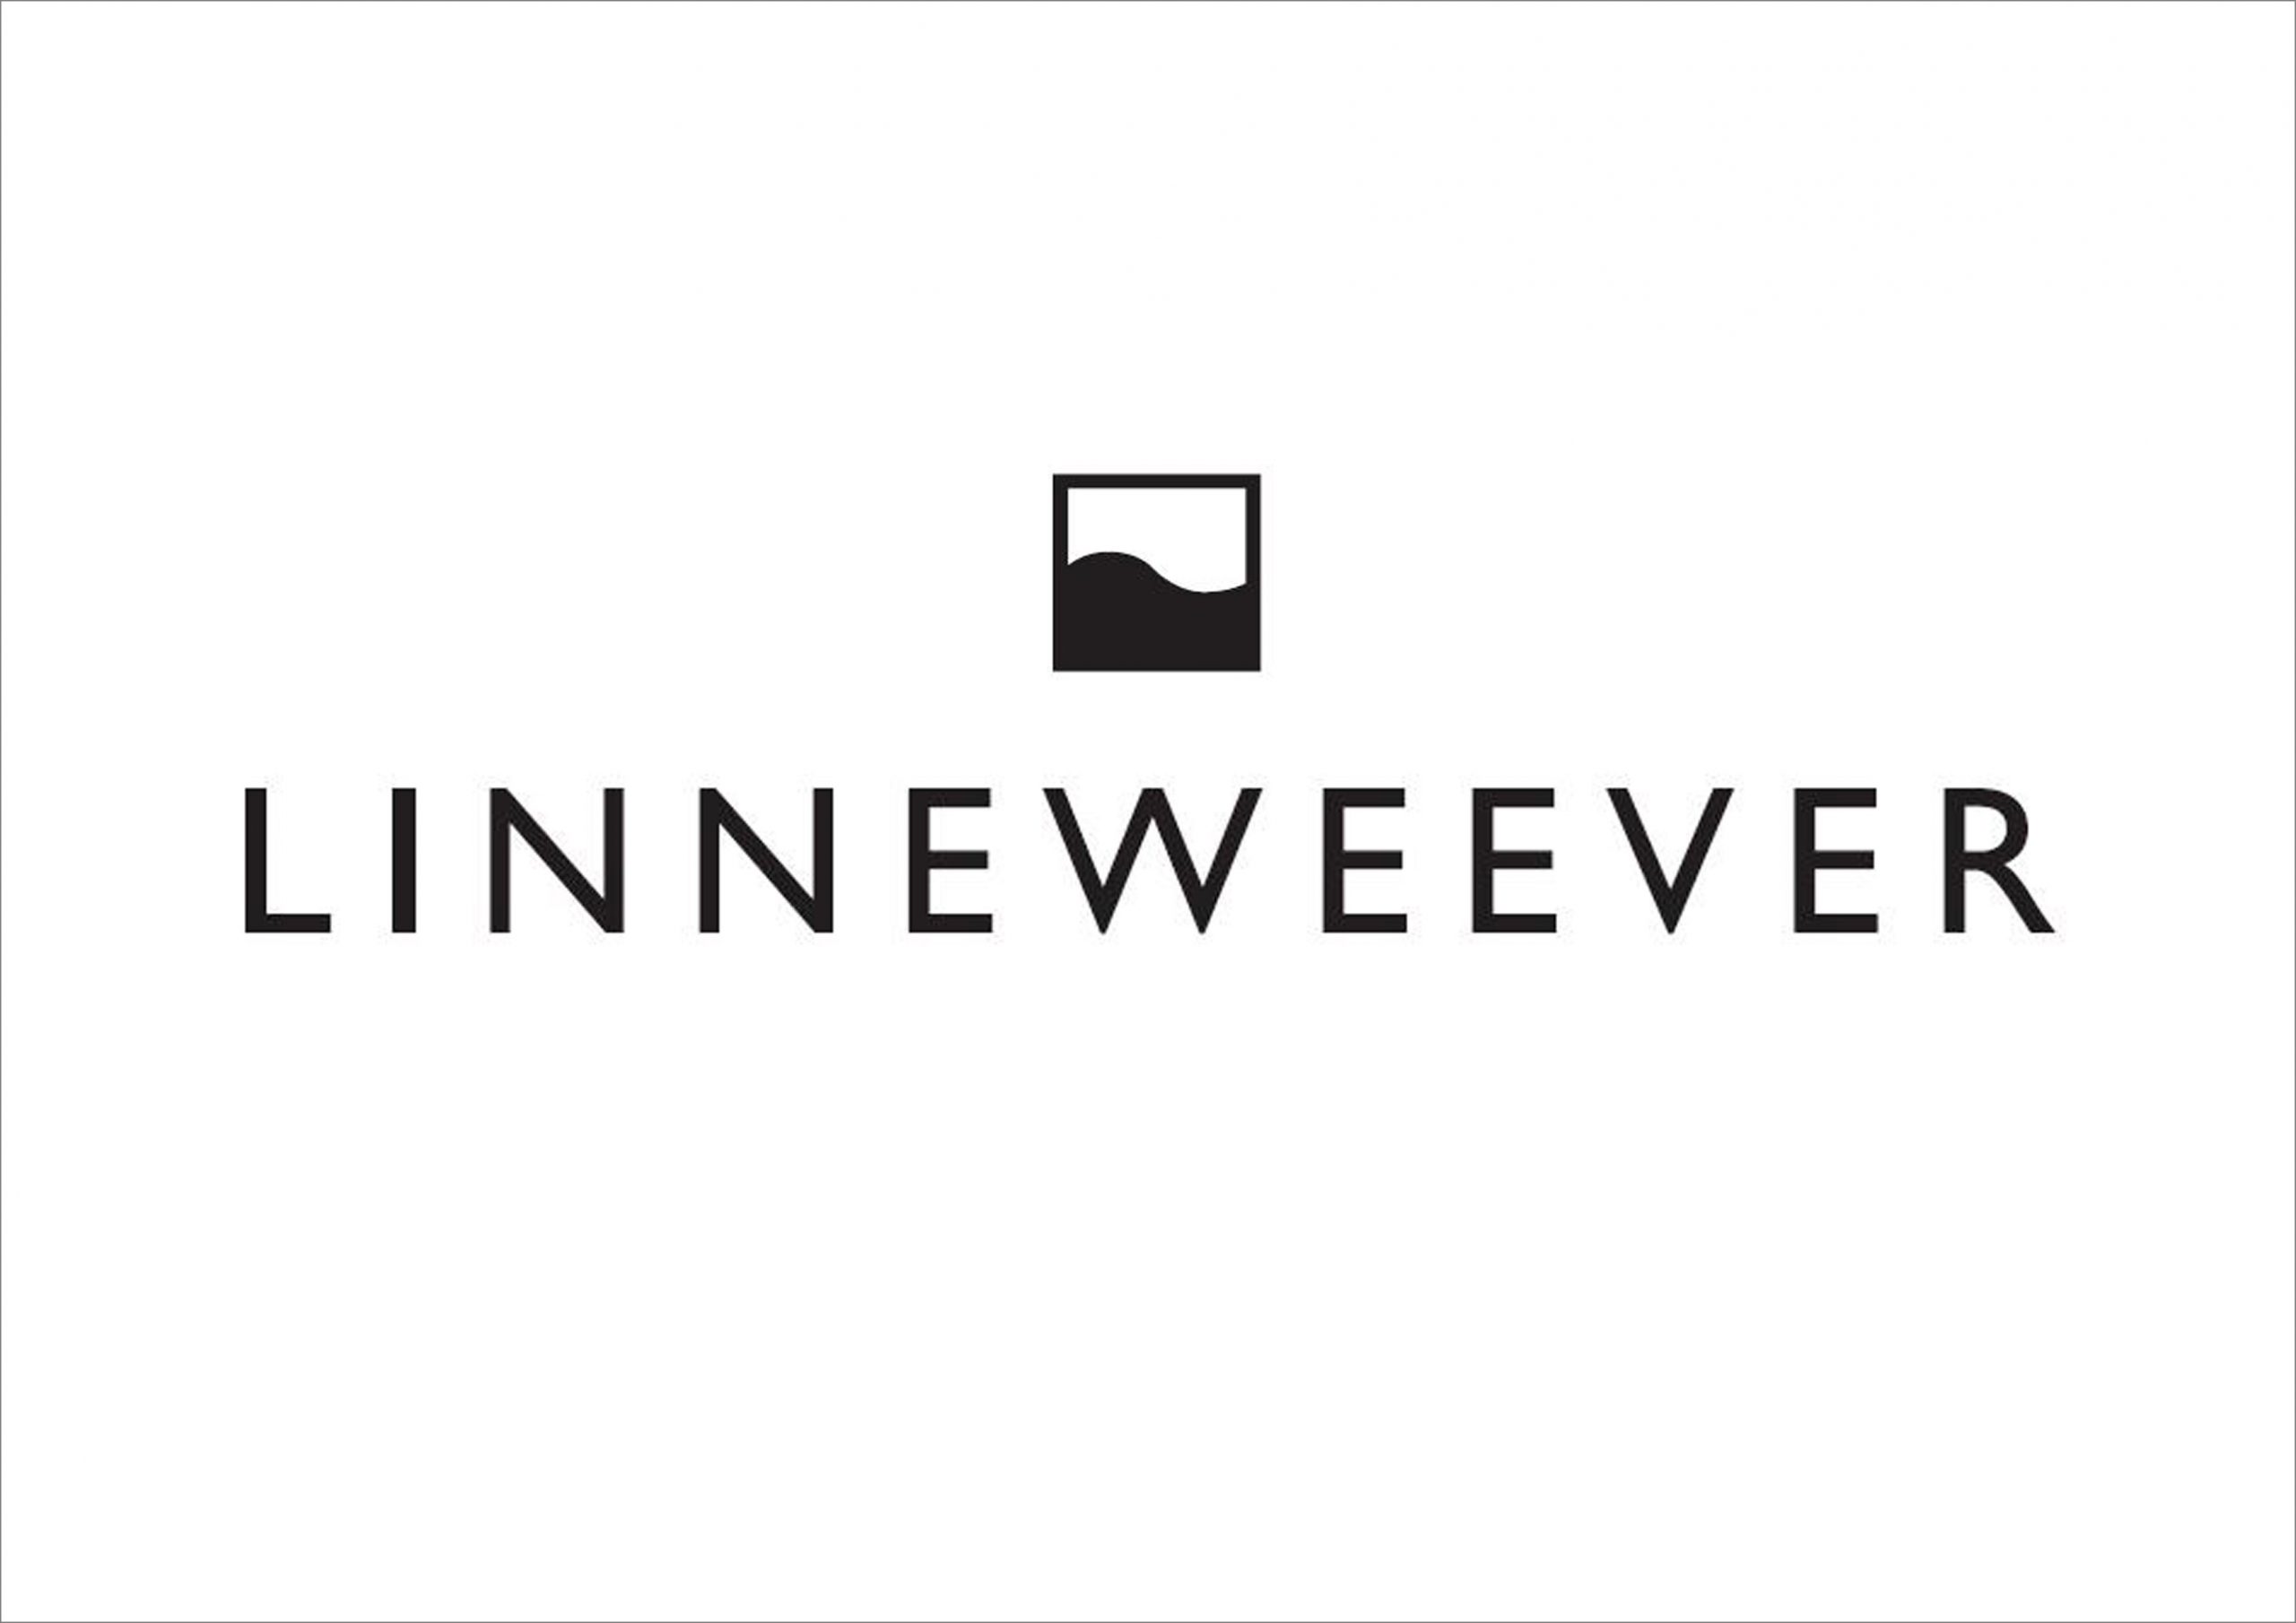 Linneweever